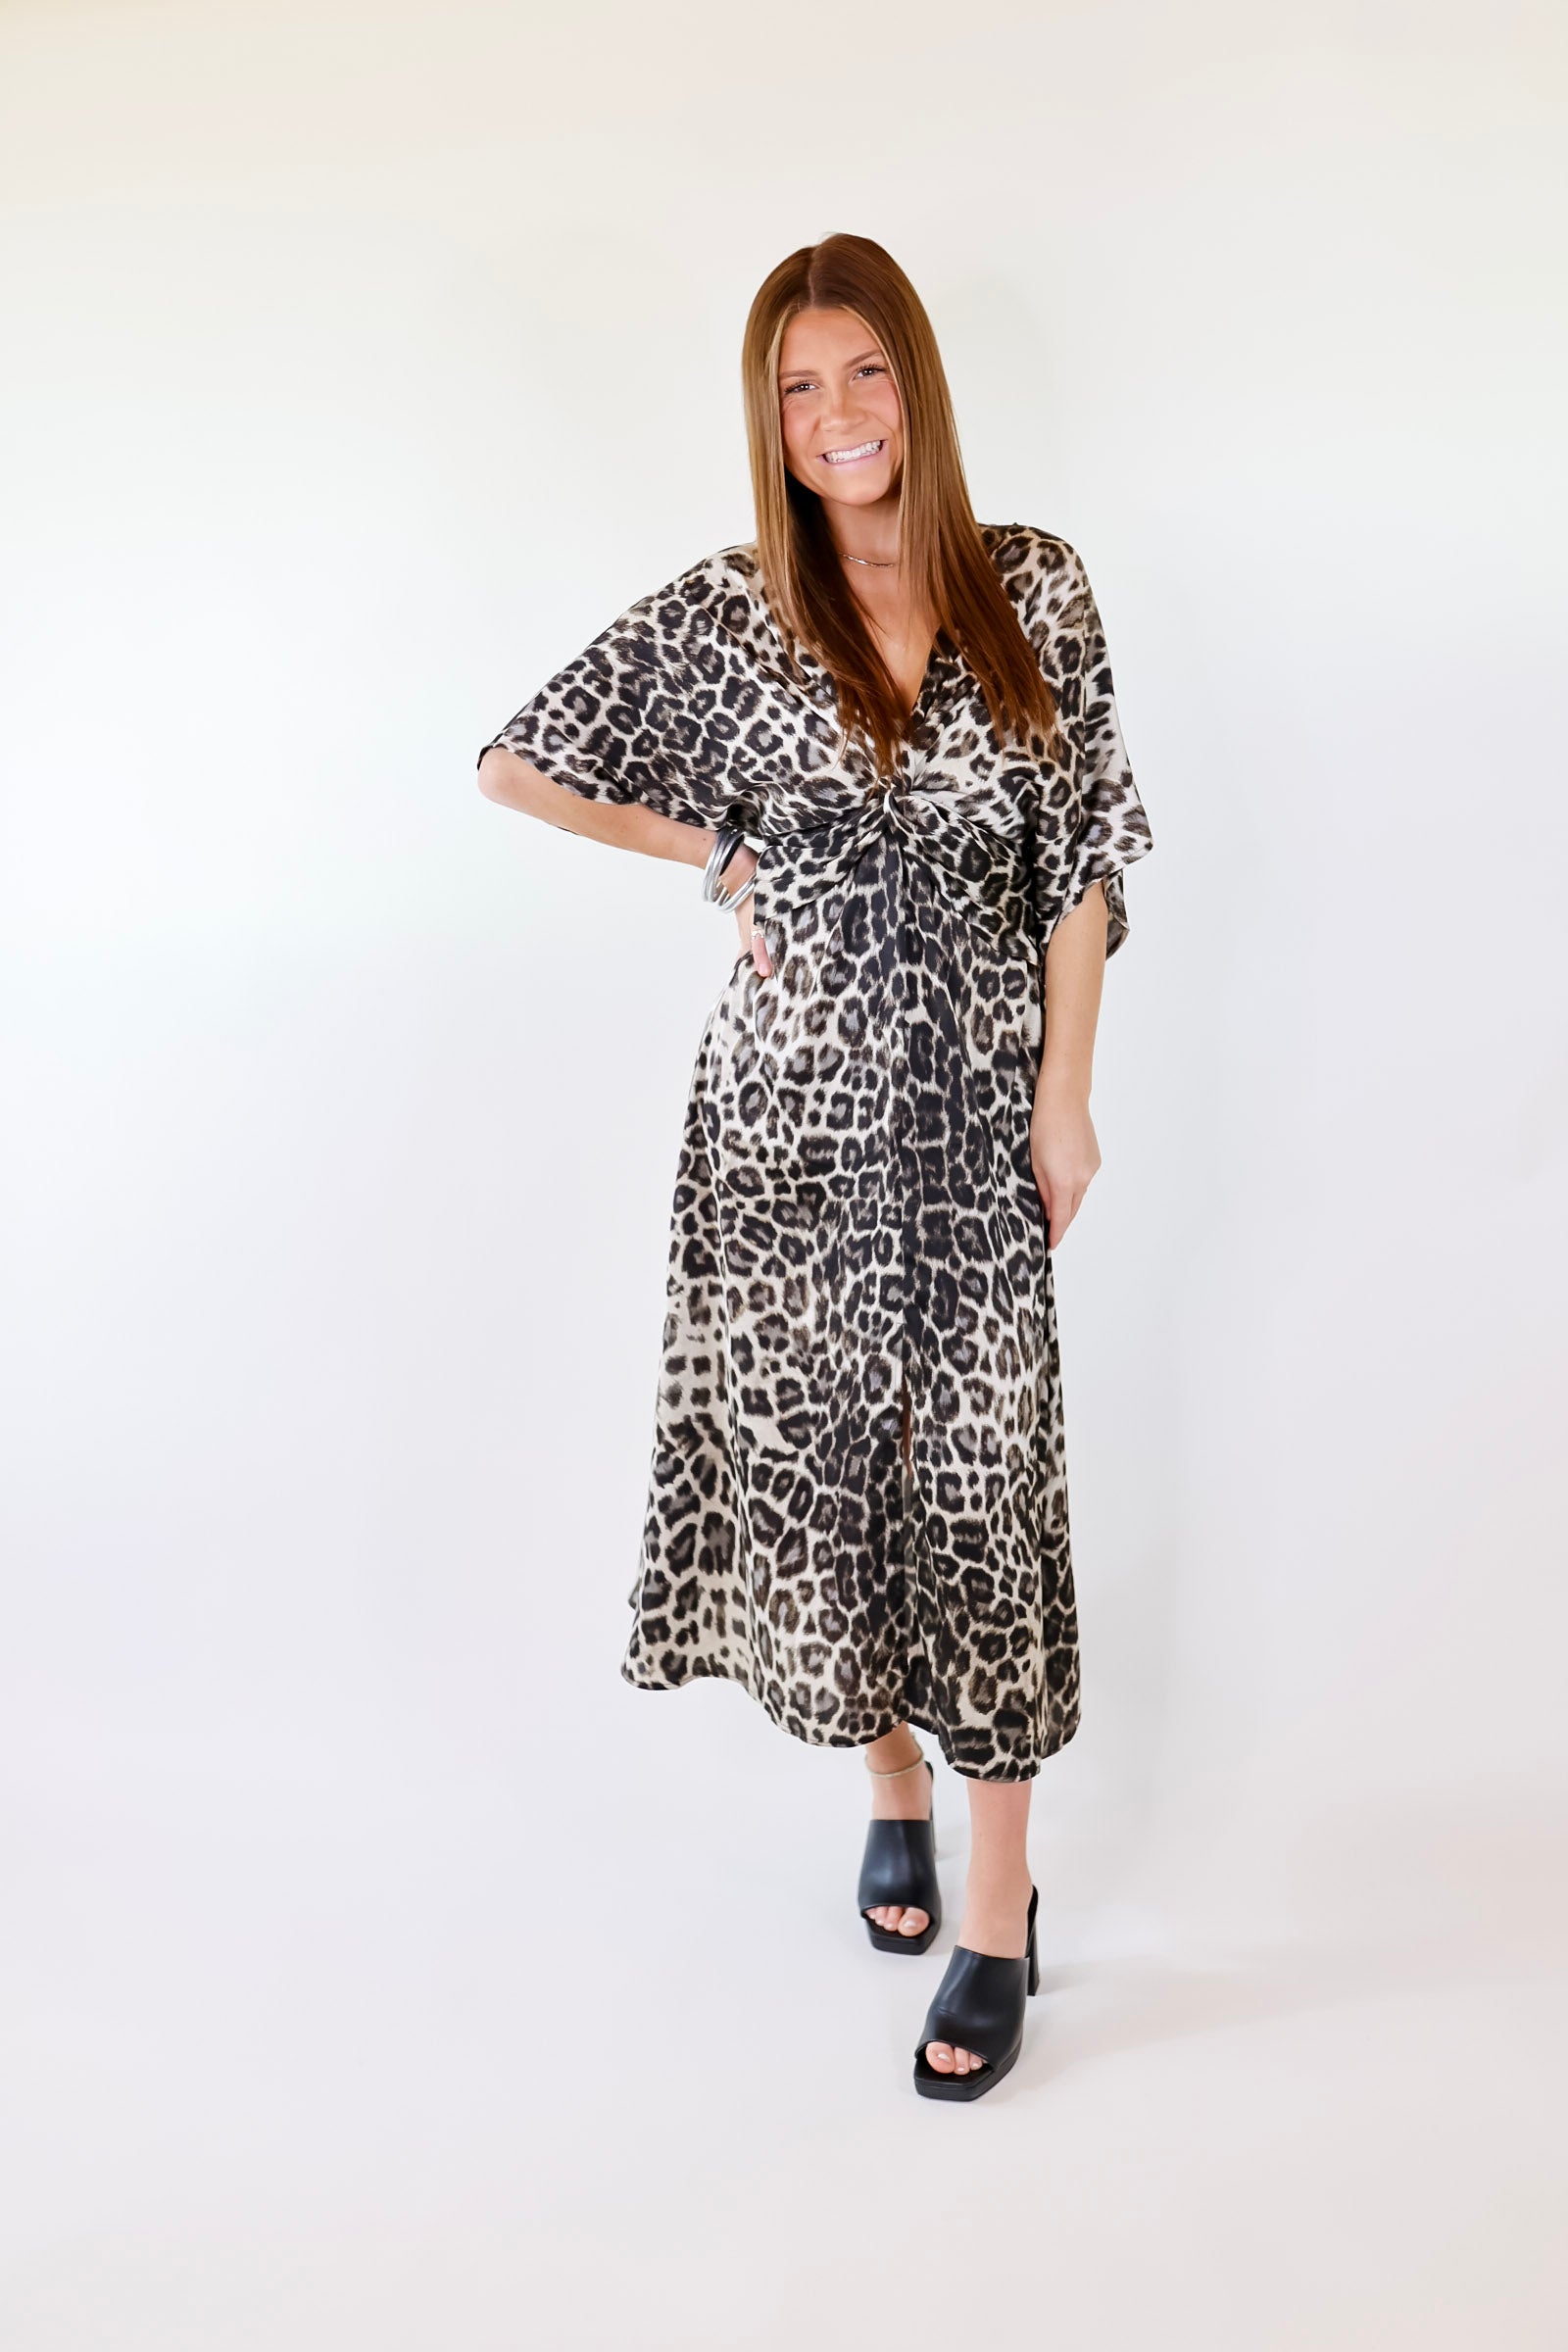 Take My Breath Away Front Knot Leopard Print Midi Dress in Grey - Giddy Up Glamour Boutique